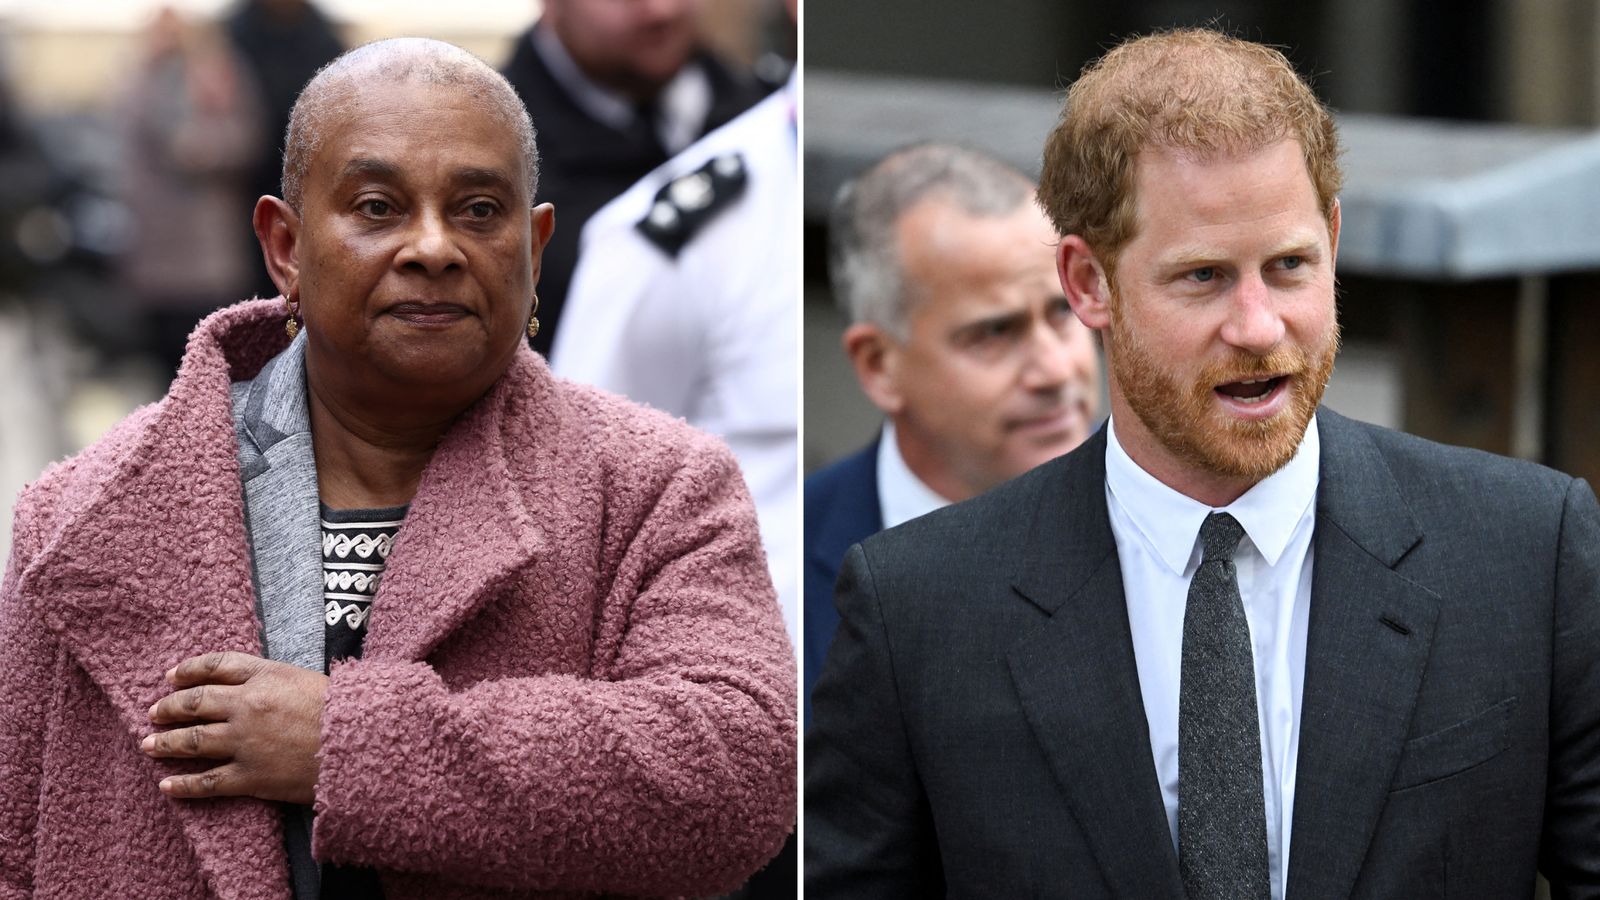 Stephen Lawrence's mother Doreen was effectively 'gaslit' by Daily Mail, court told - as Harry makes appearance